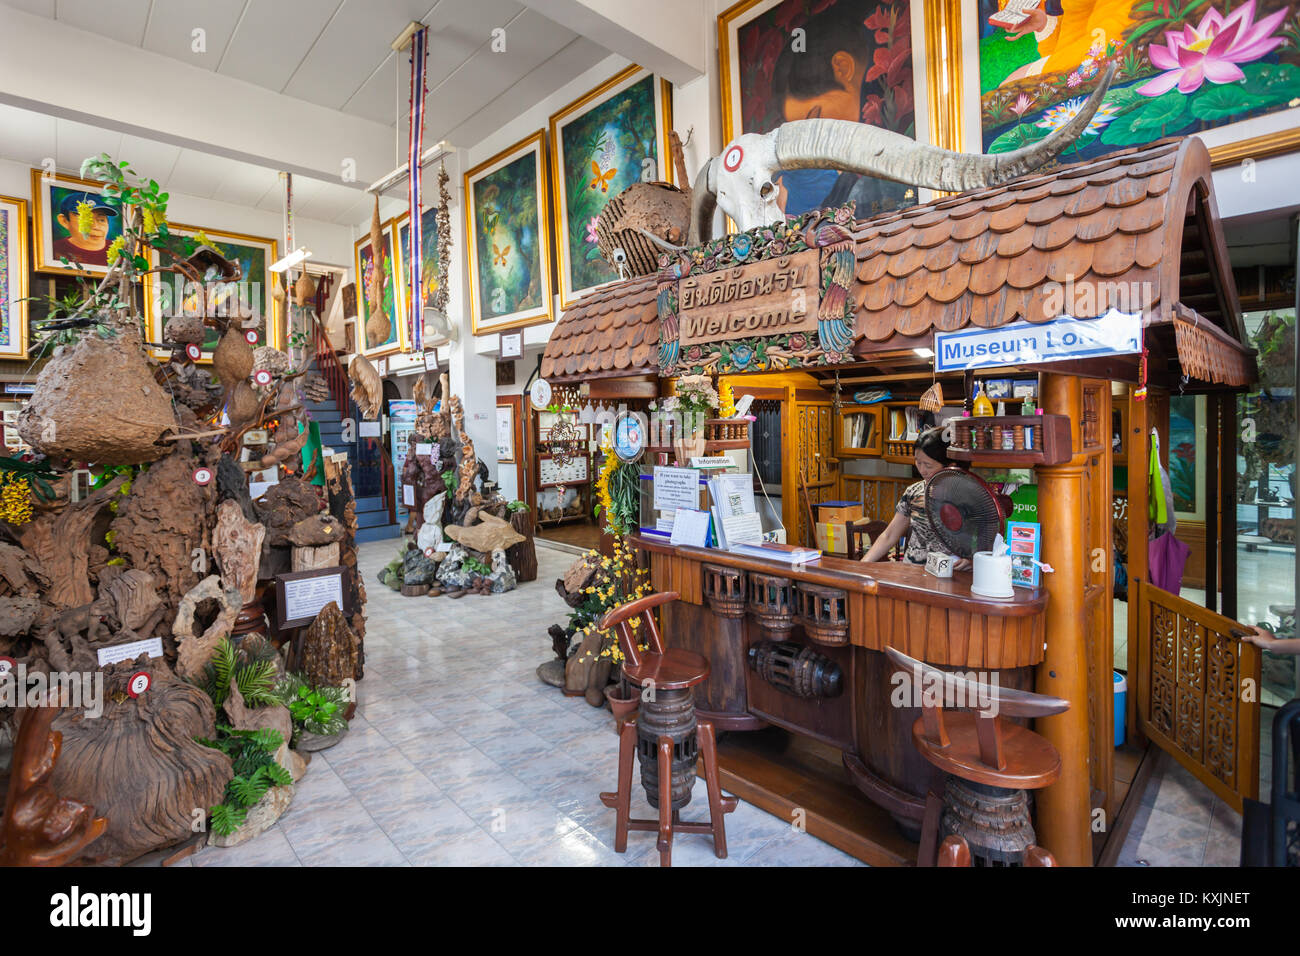 CHIANG MAI, THAILAND - OCTOBER 29, 2014: Museum of World Insects and Natural Wonders interior, Chiang Mai, Thailand. Stock Photo